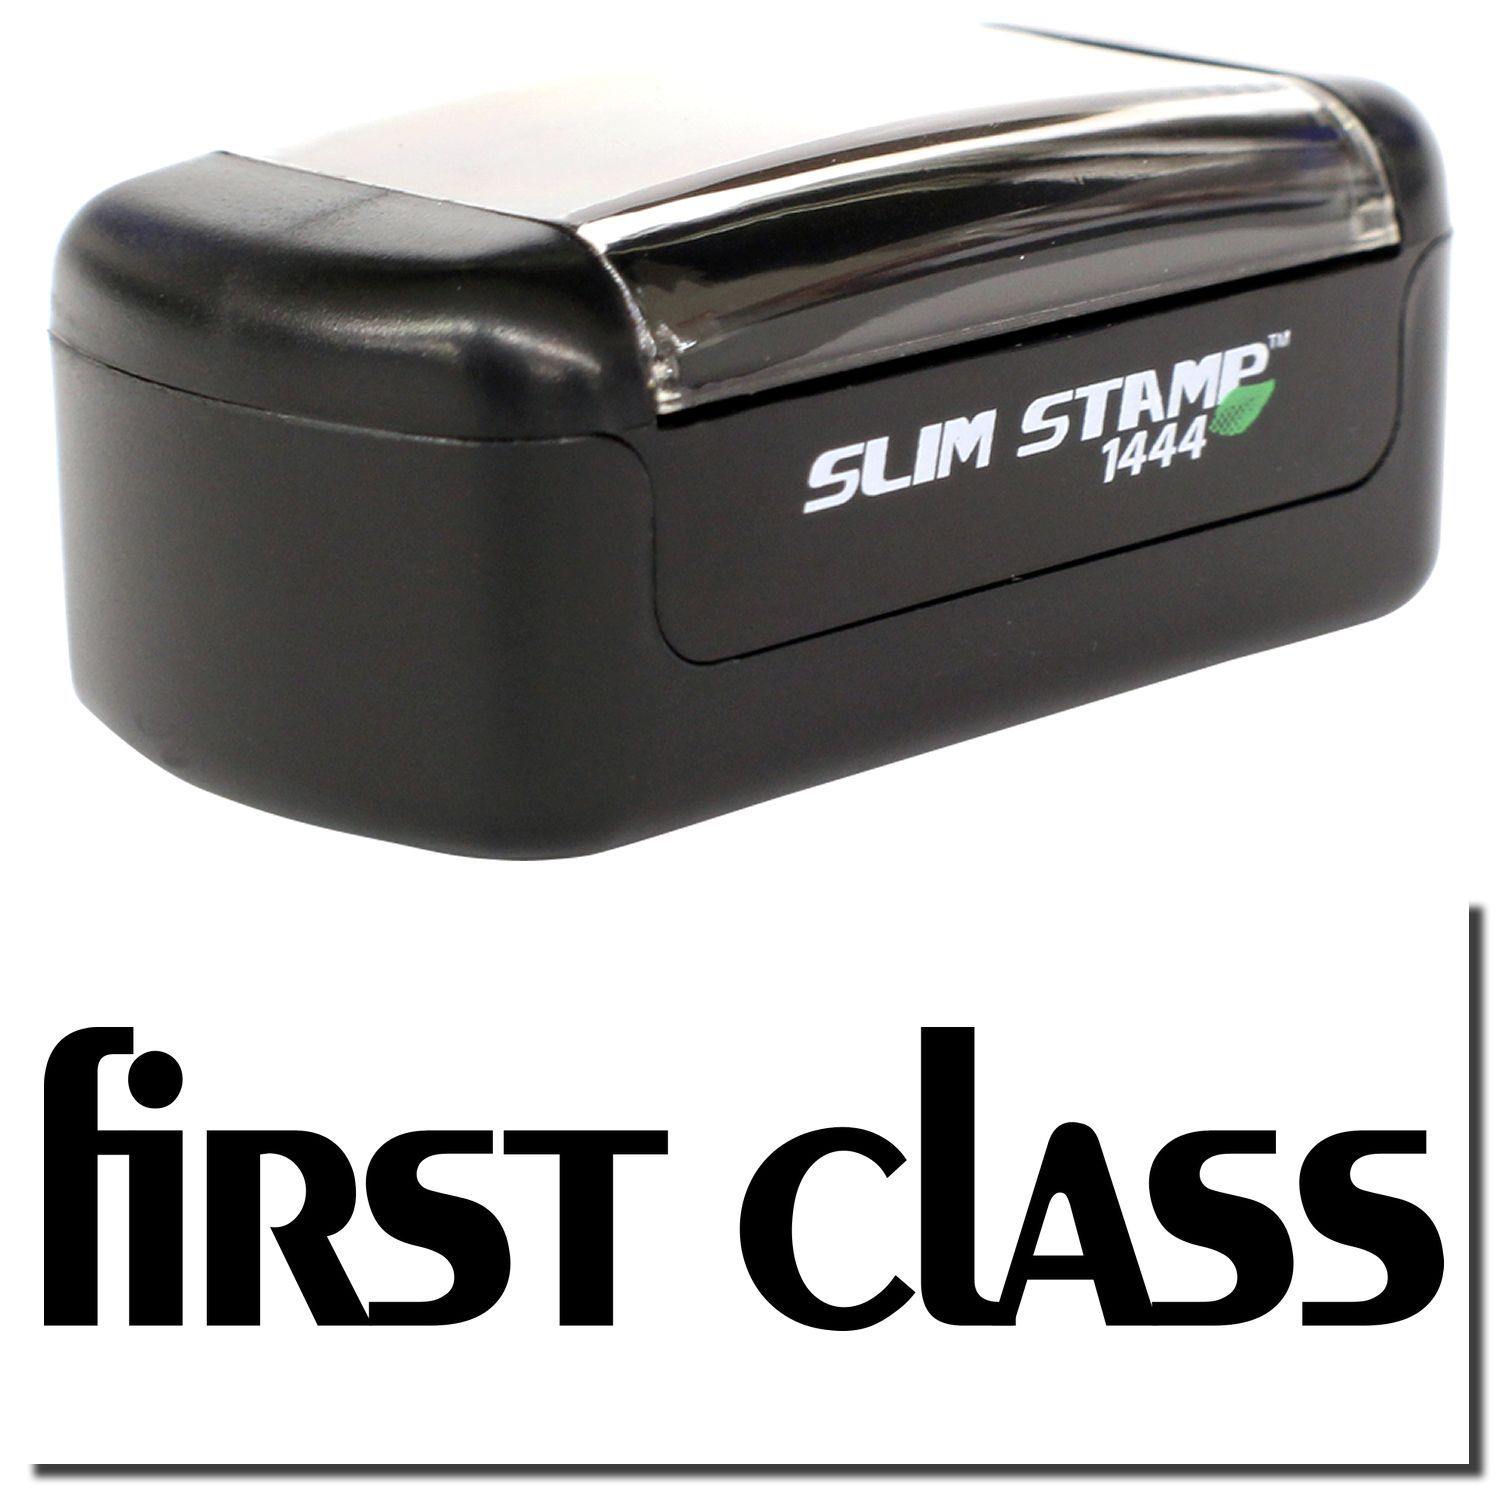 A stock office pre-inked stamp with a stamped image showing how the text "first class" in lowercase letters is displayed after stamping.